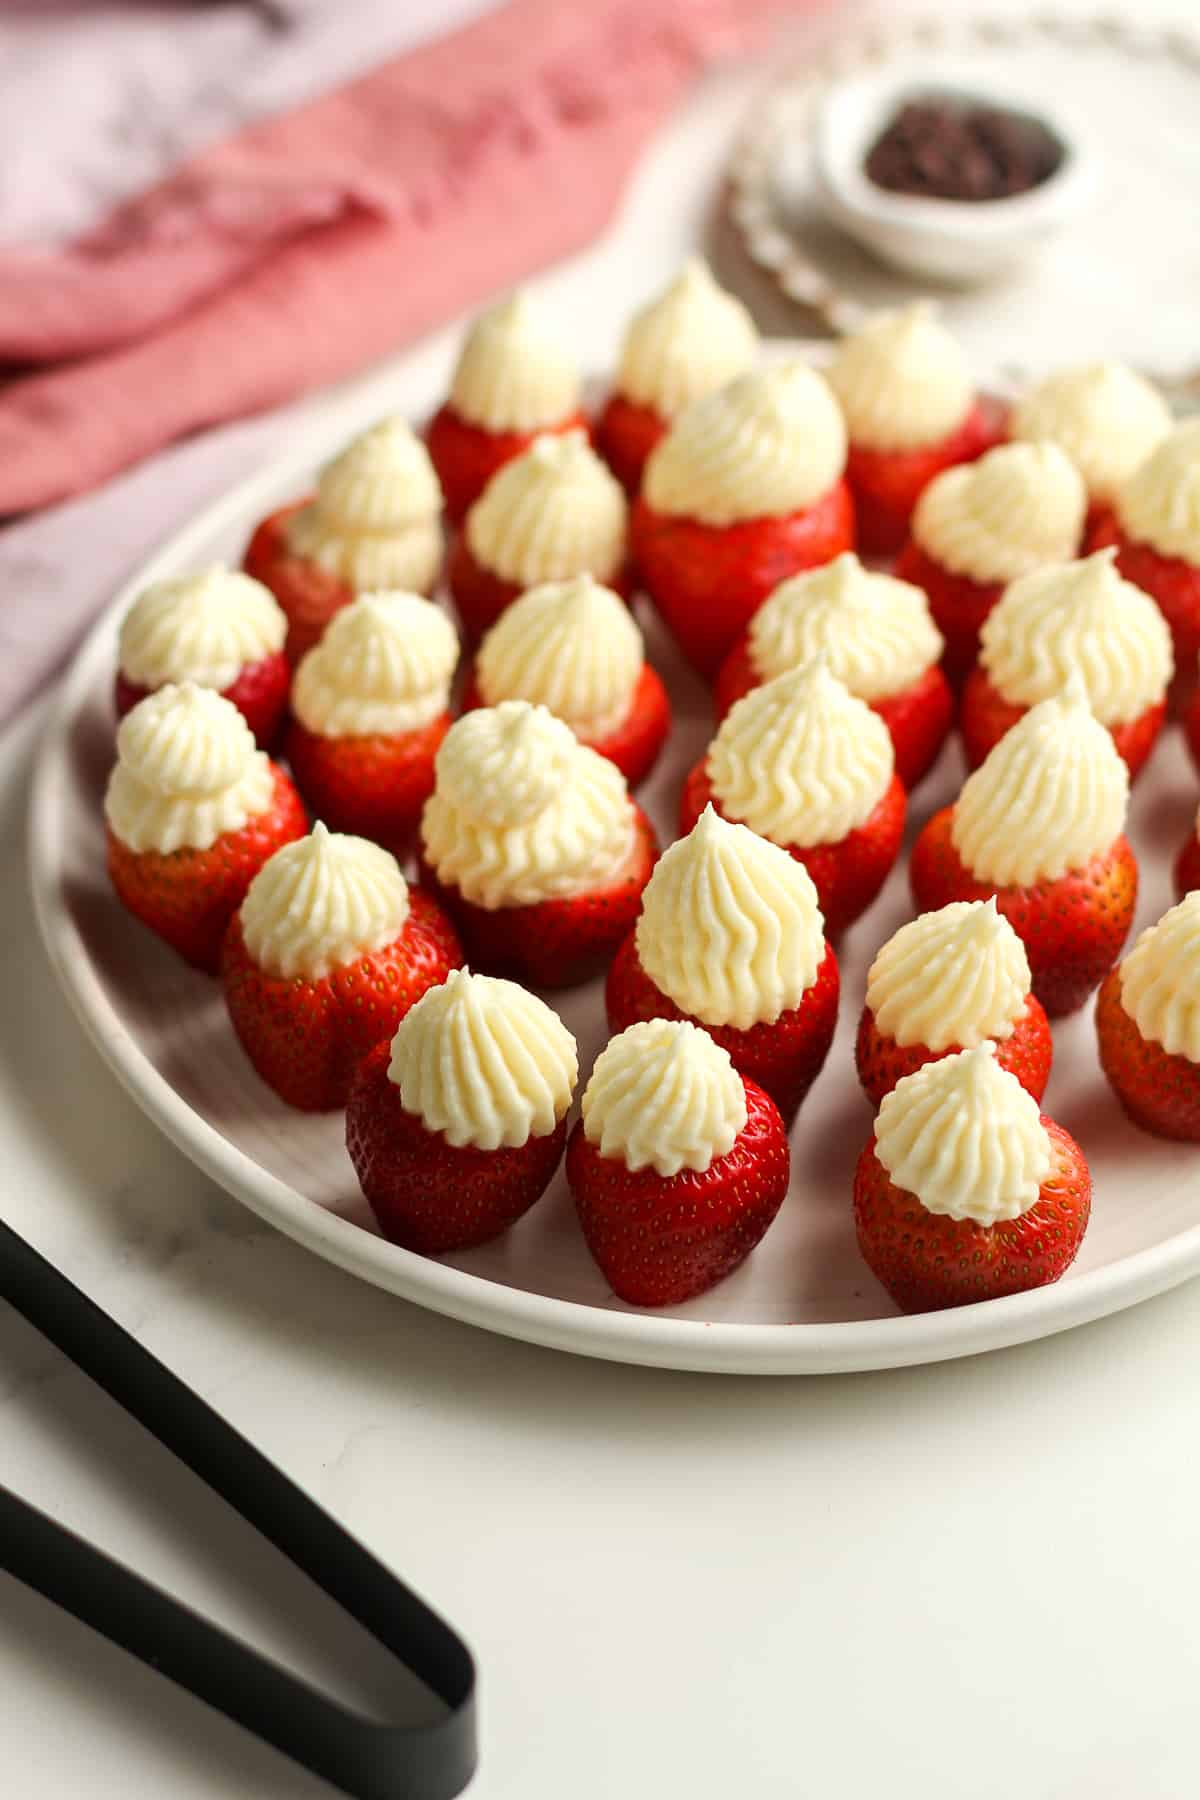 Side view of the cheesecake bites.